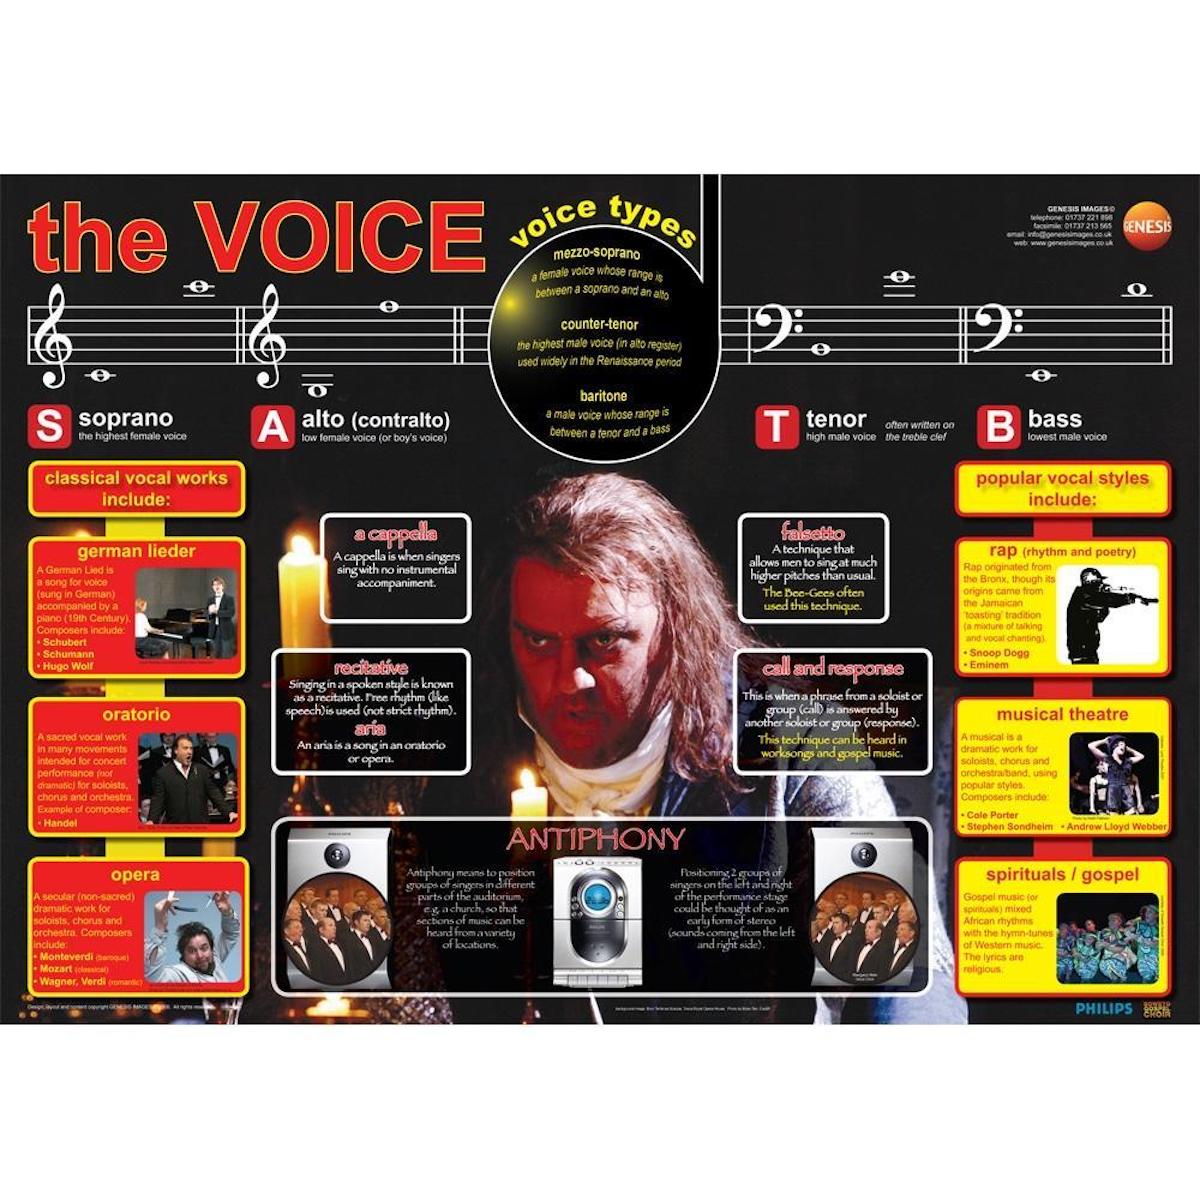 The Human Voice - A1 wall poster